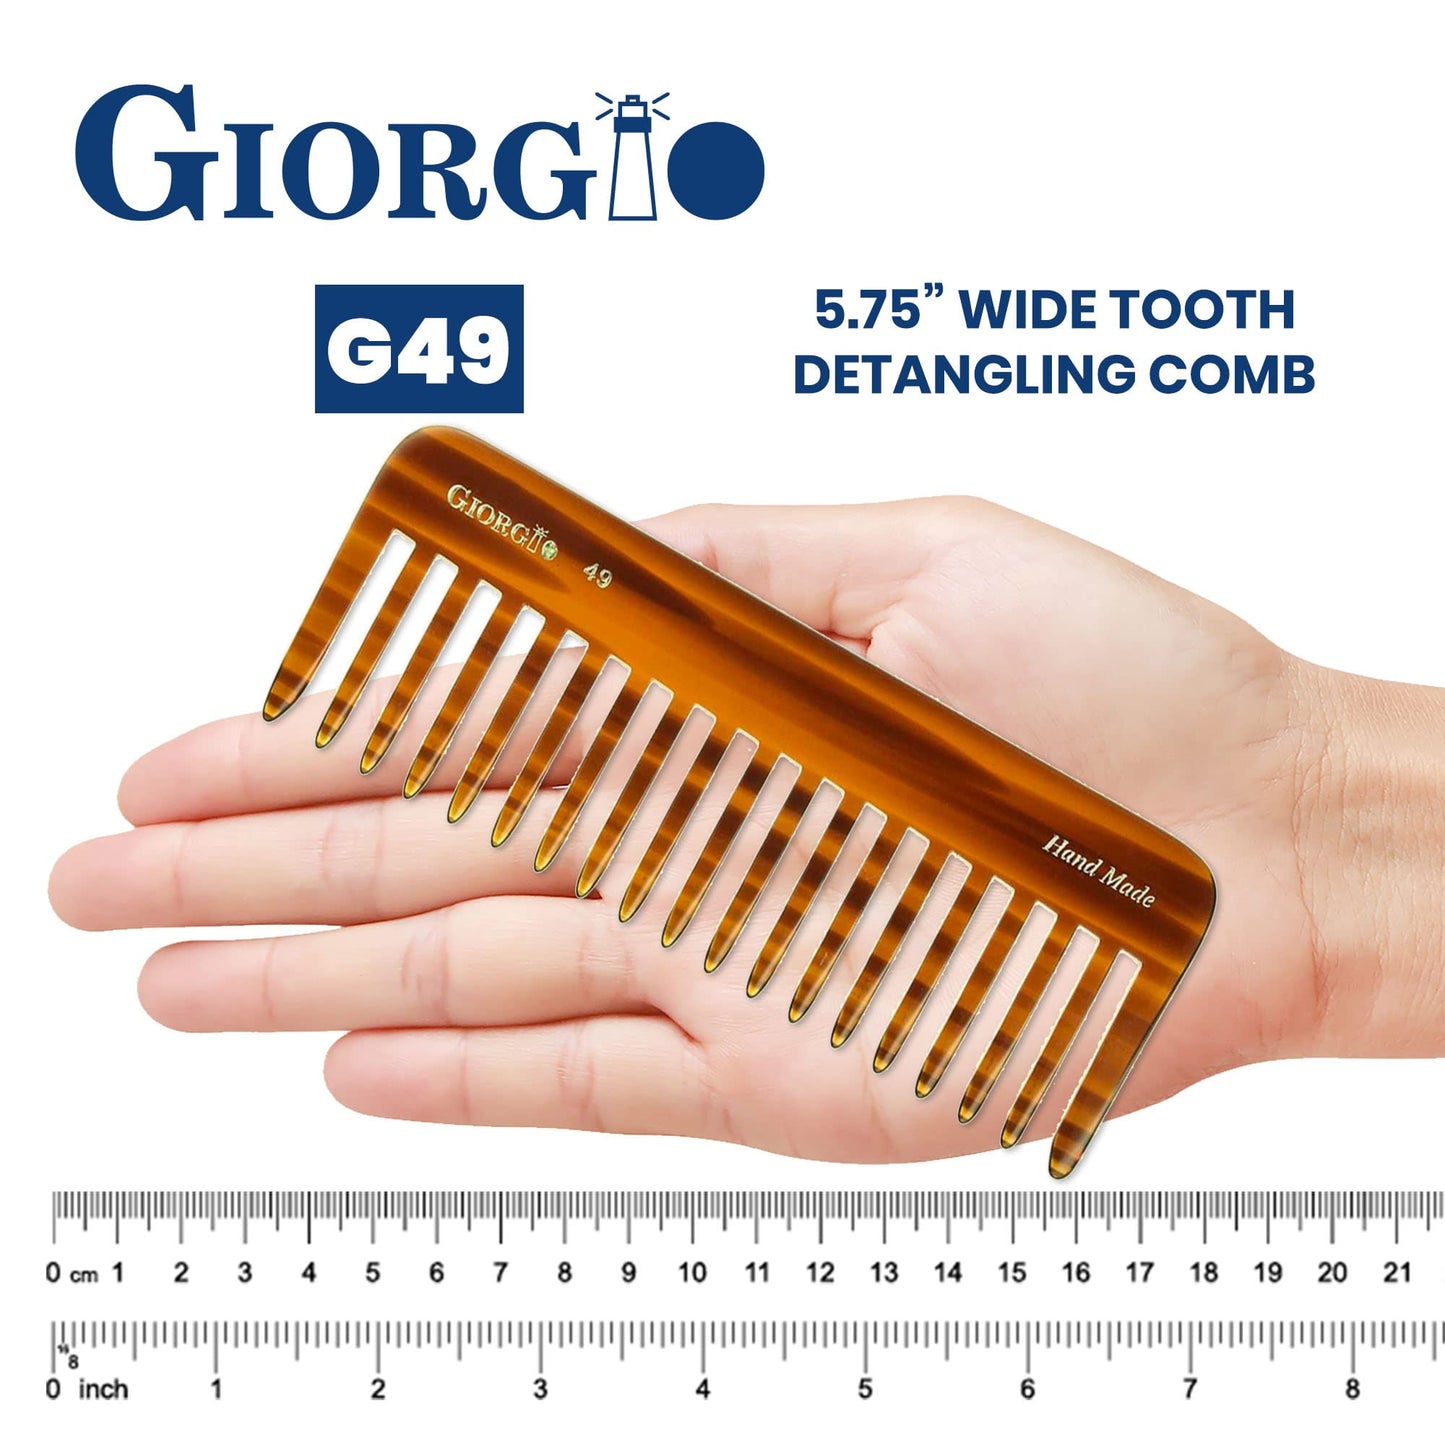 Giorgio G49 Large 5.75 Inch Hair Detangling Comb, Wide Teeth for Thick Curly Wavy Hair. Long Hair Detangler Comb For Wet and Dry. Handmade of Quality Cellulose, Saw-Cut, Hand Polished, Tortoise Shell